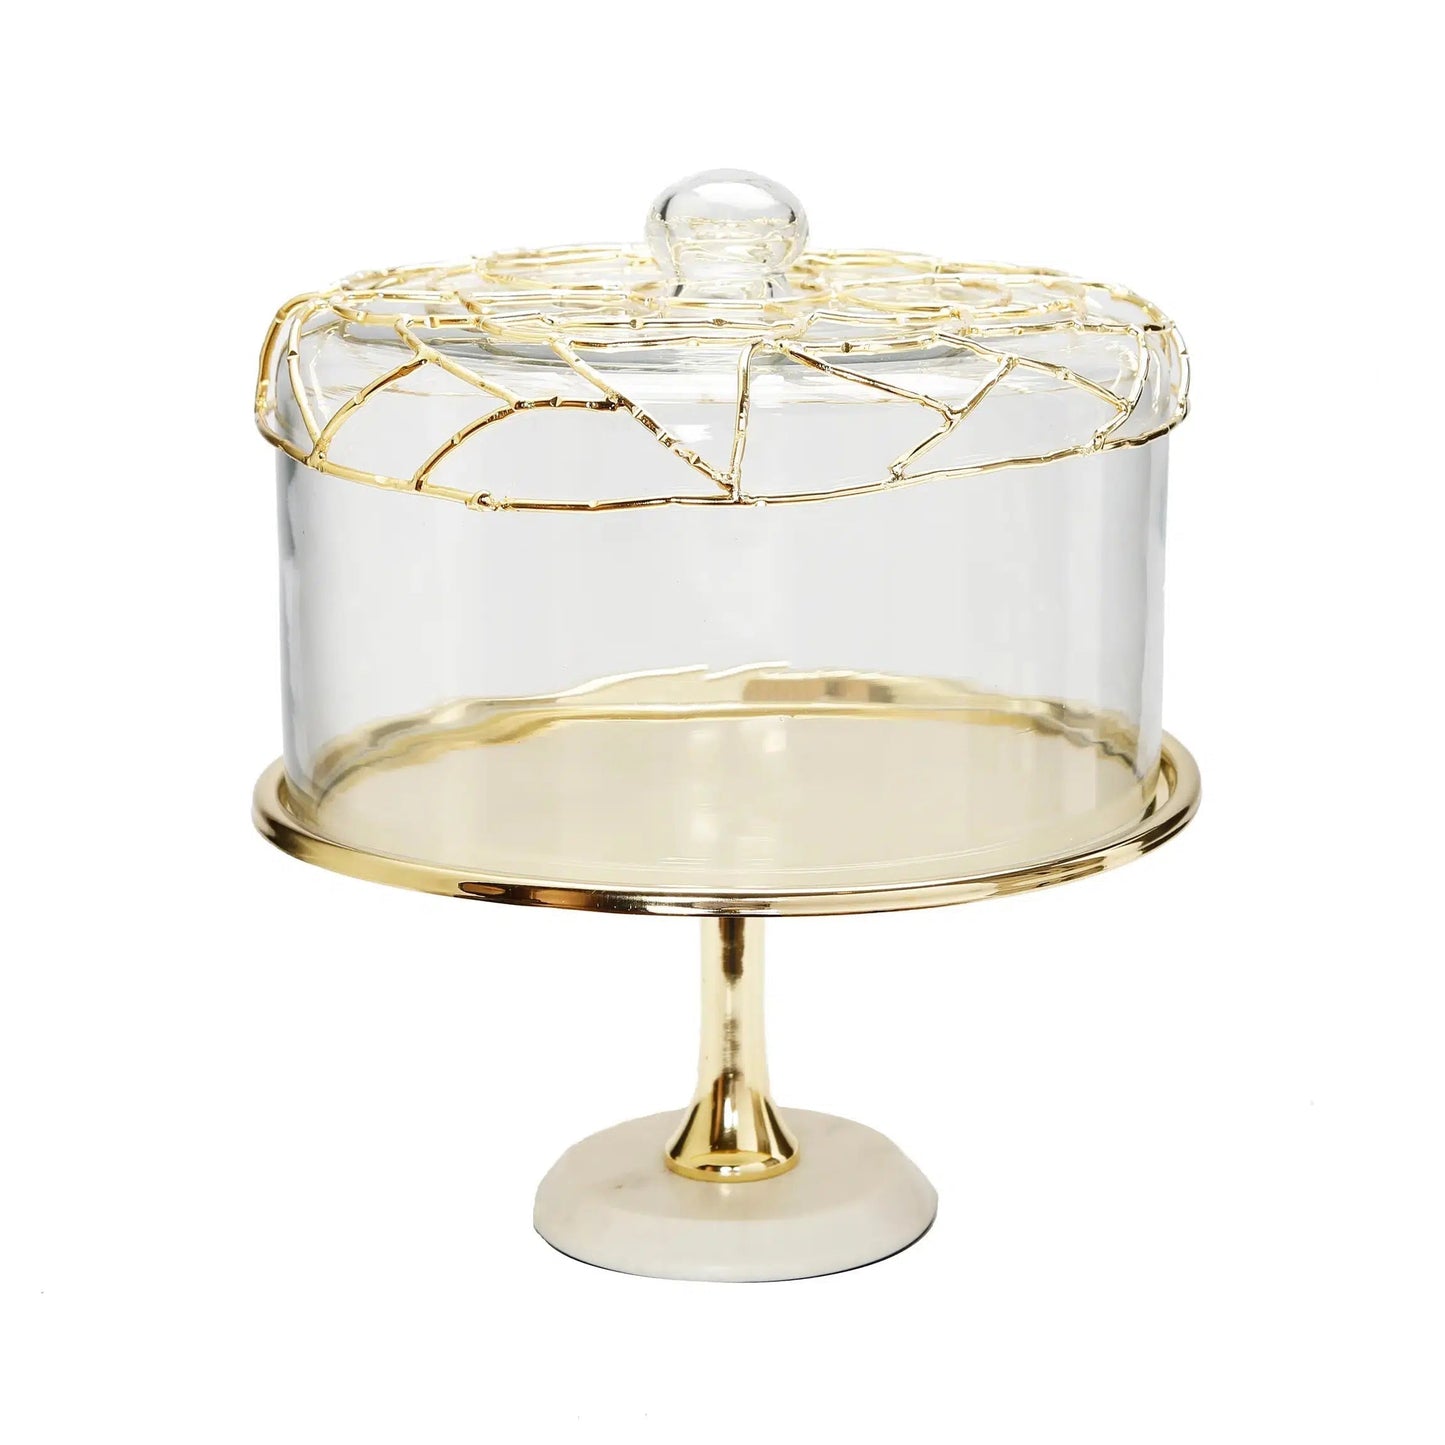 Gold Cake Tray Glass Dome, White Marble Base Mesh Design Cake Stands High Class Touch - Home Decor 